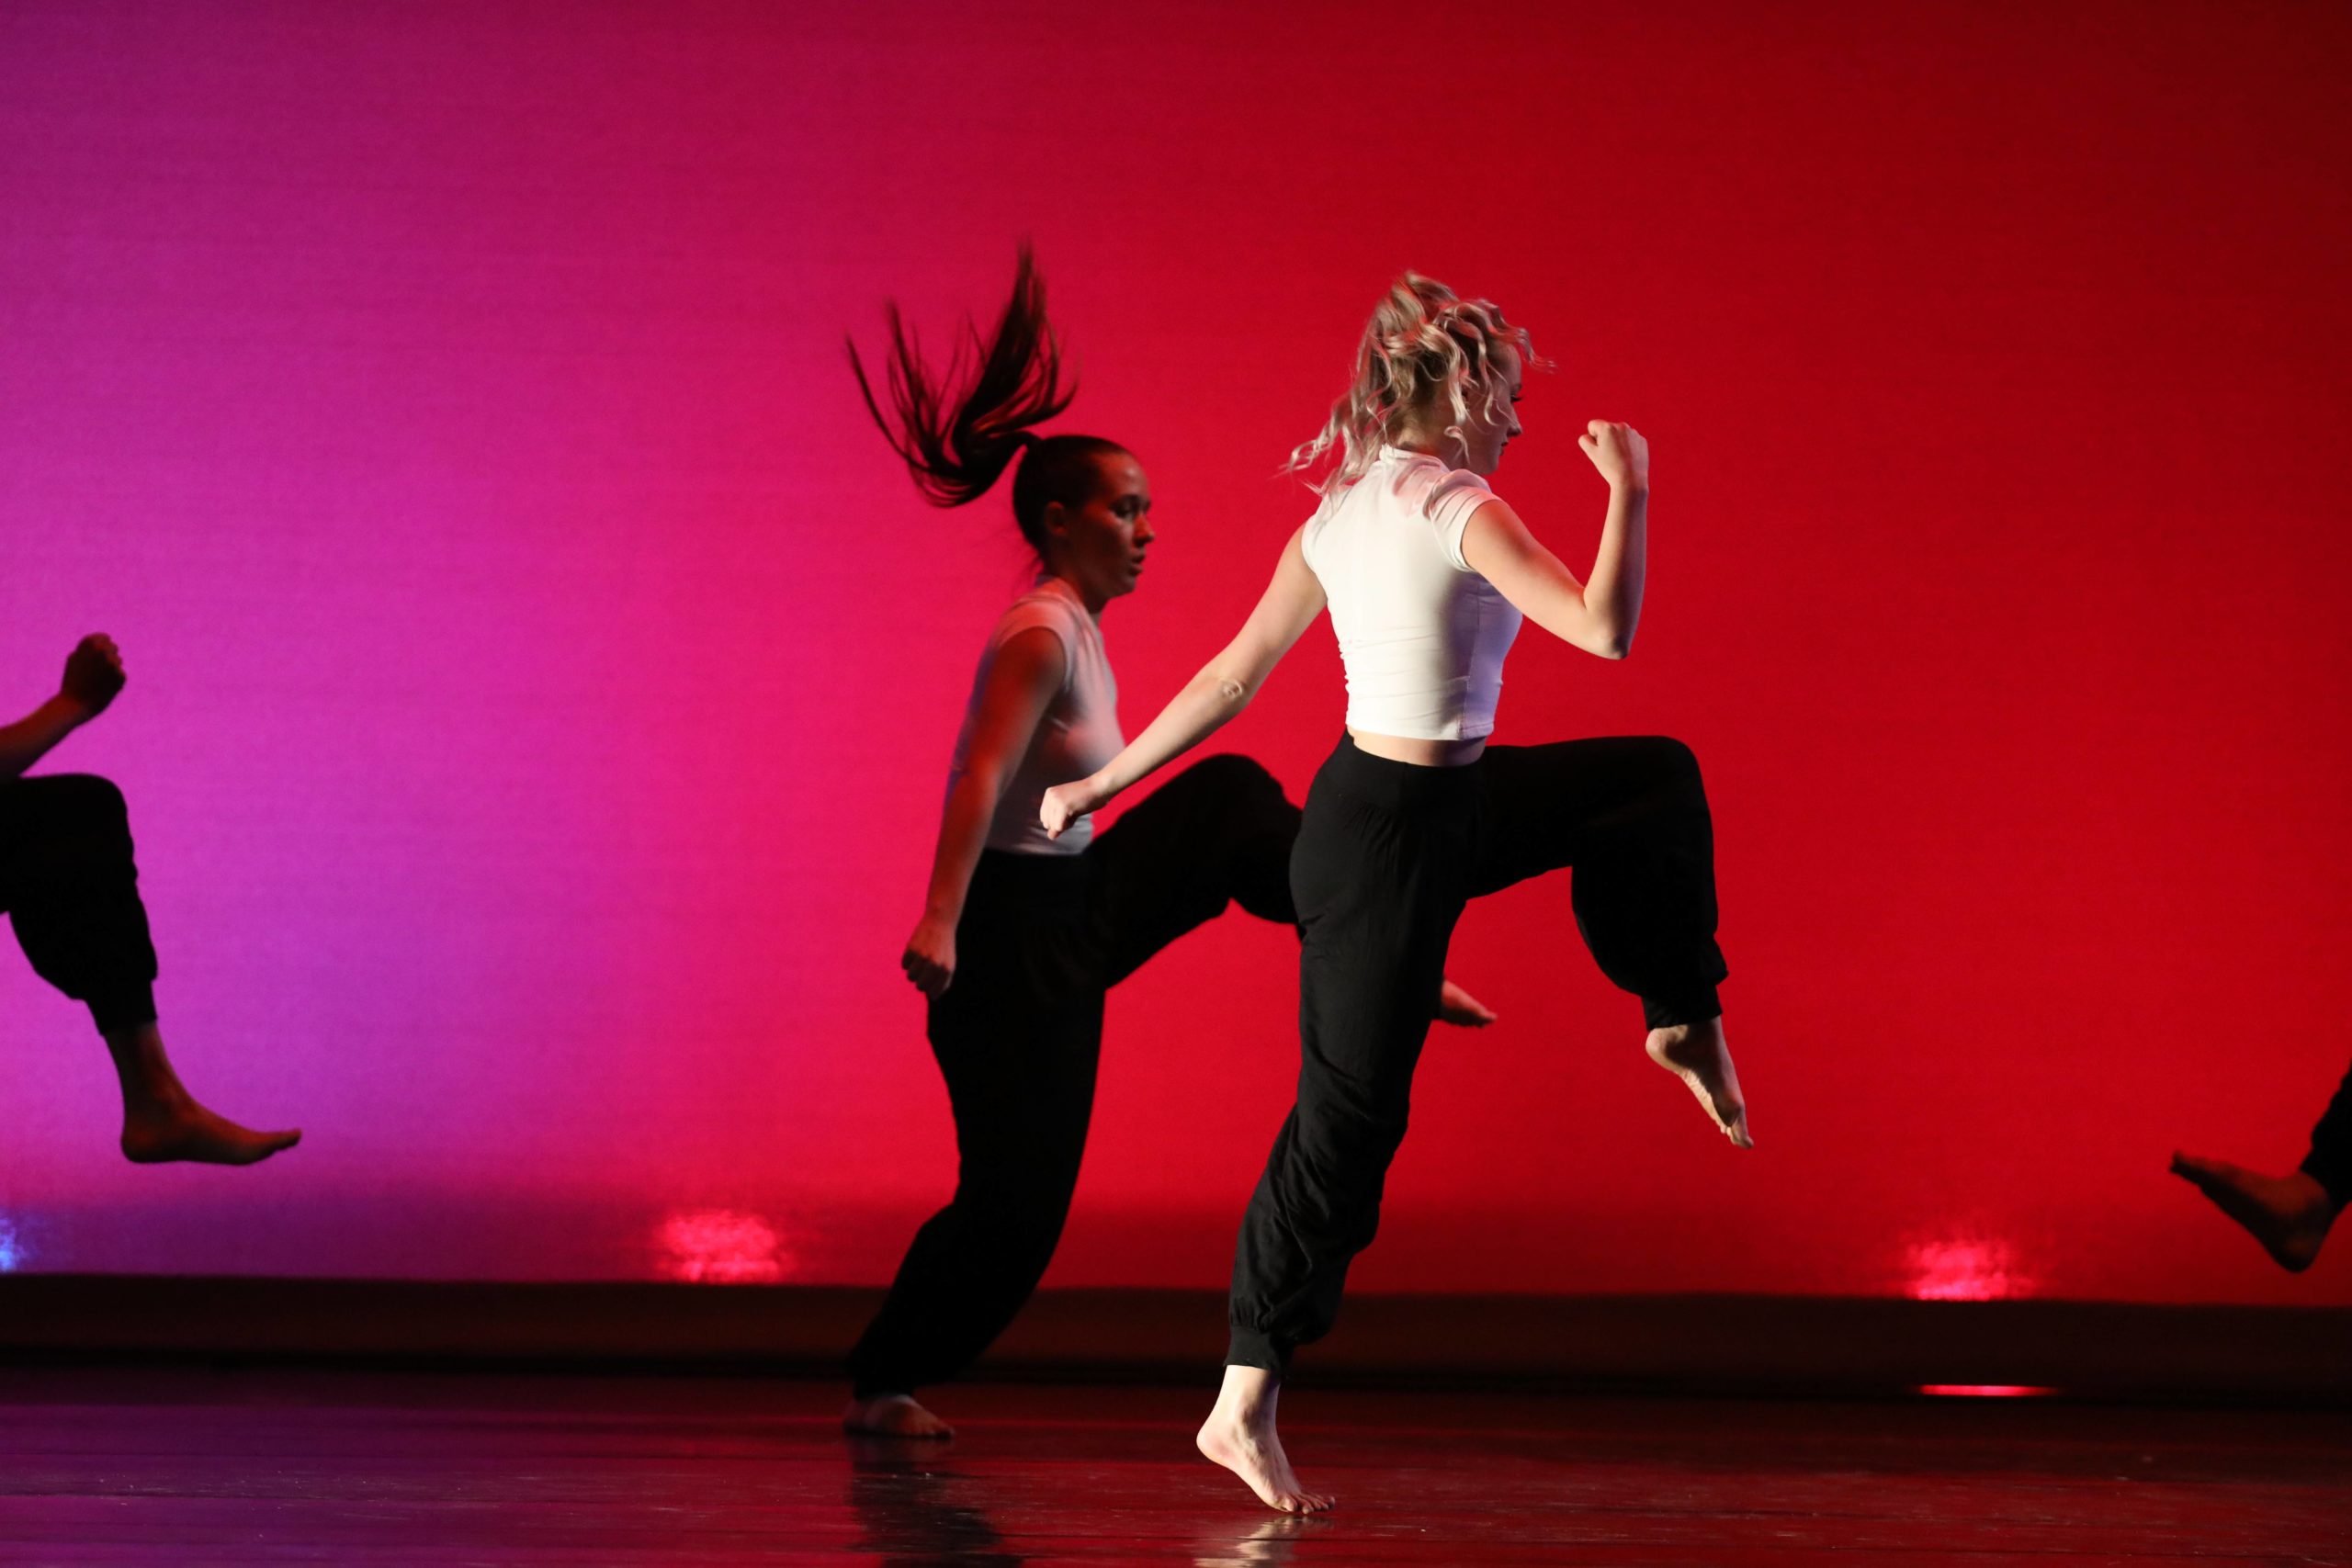 Two students dancing on stage